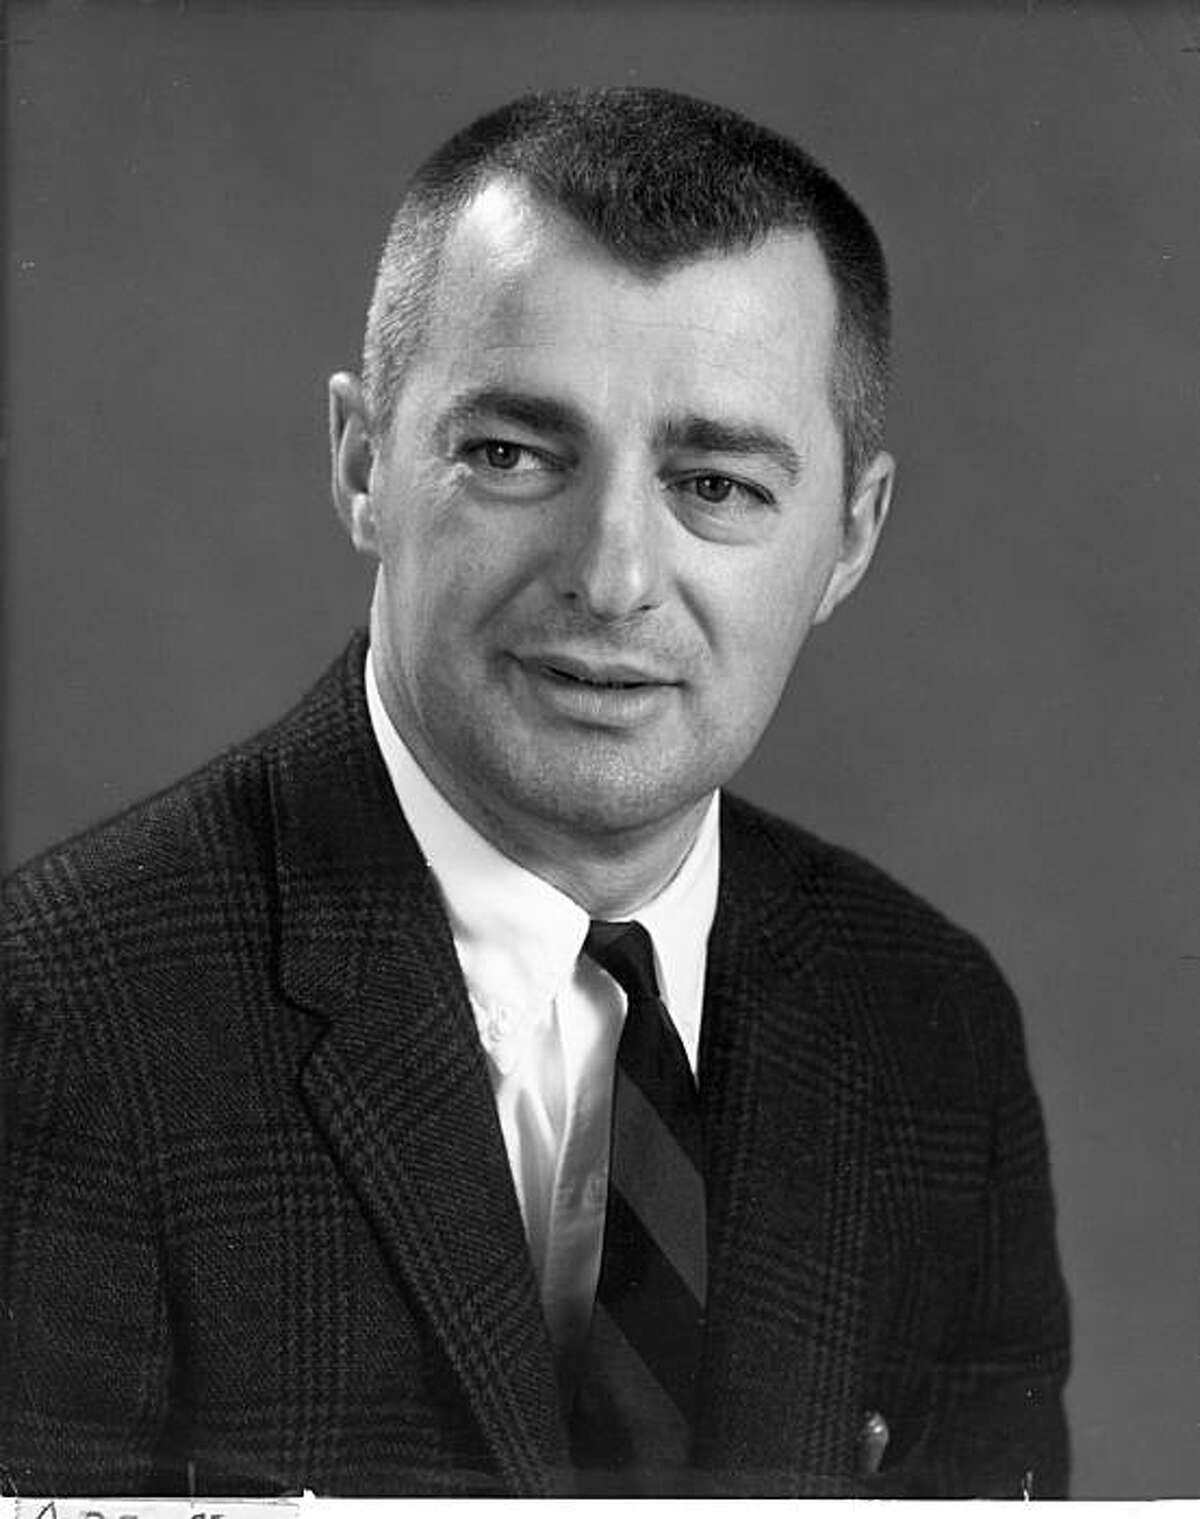 Phil Vukicevich, in 1967 after he had been named USF basketball coach